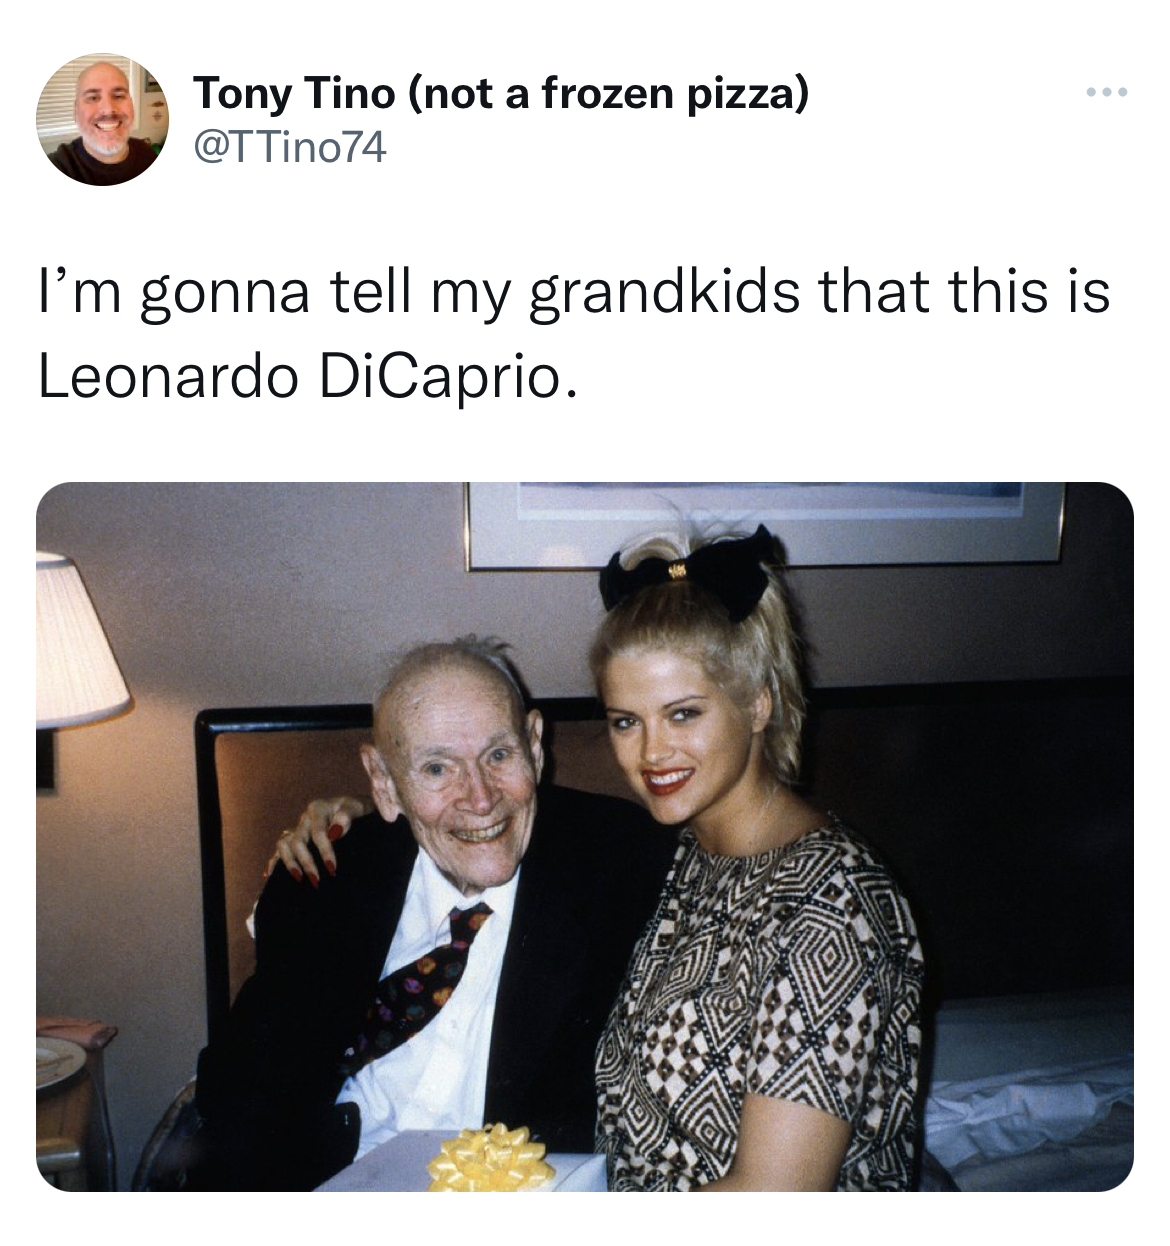 Leonardo DiCaprio Girlfriend Memes - gold digger marriage - Tony Tino not a frozen pizza I'm gonna tell my grandkids that this is Leonardo DiCaprio.